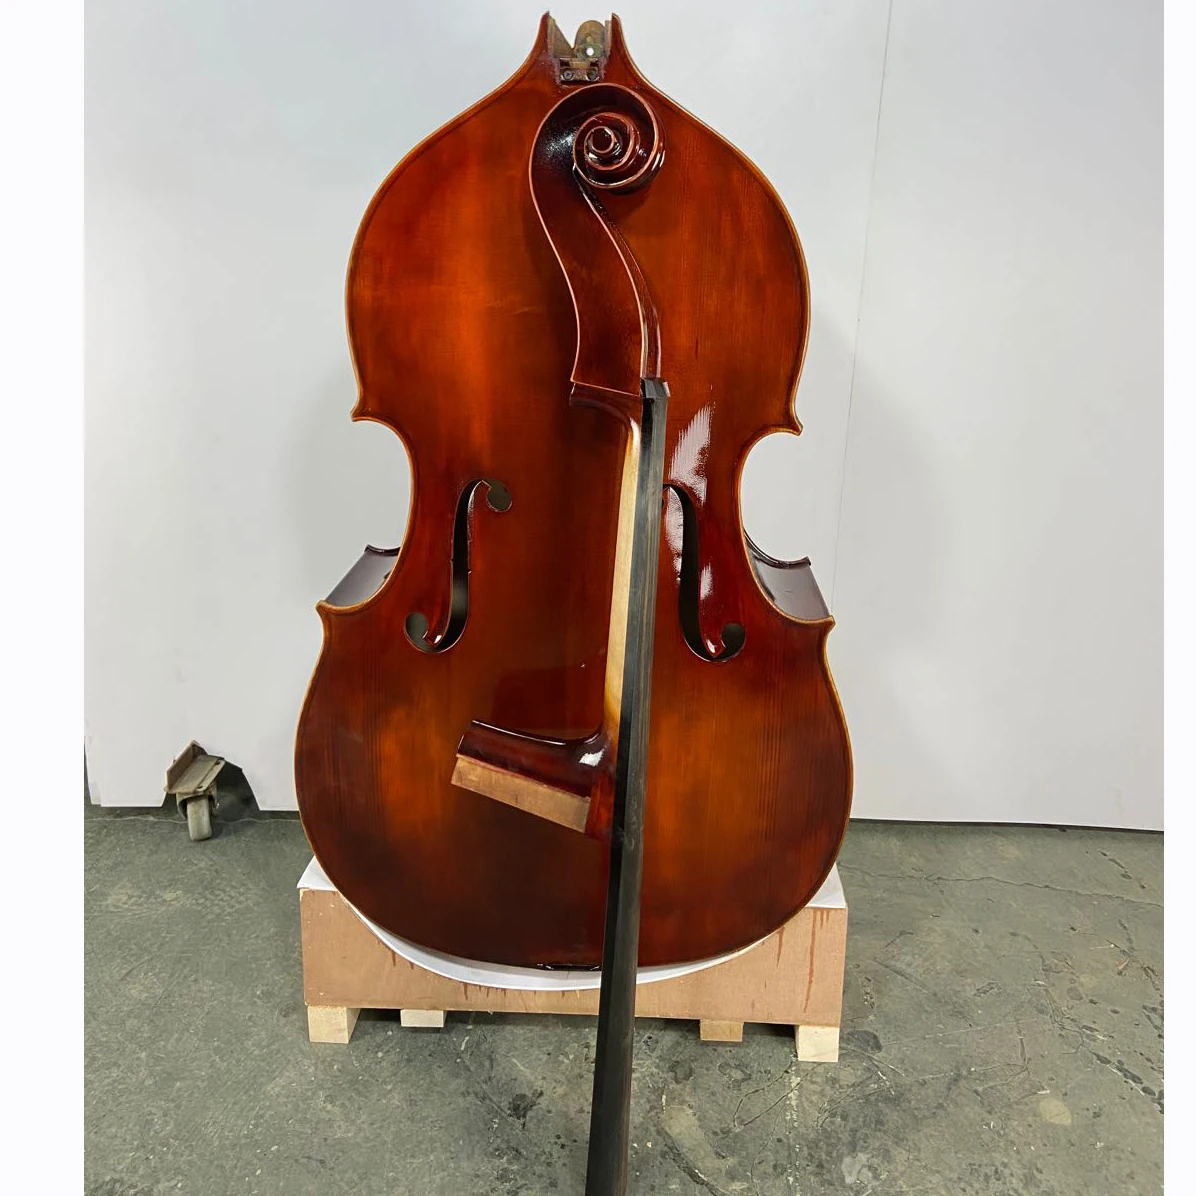 

High Quality Rare Removable Handle Double Bass Solid Wood Spruce Panel Maple Back Ebony Fingerboard Hand Made Instrument